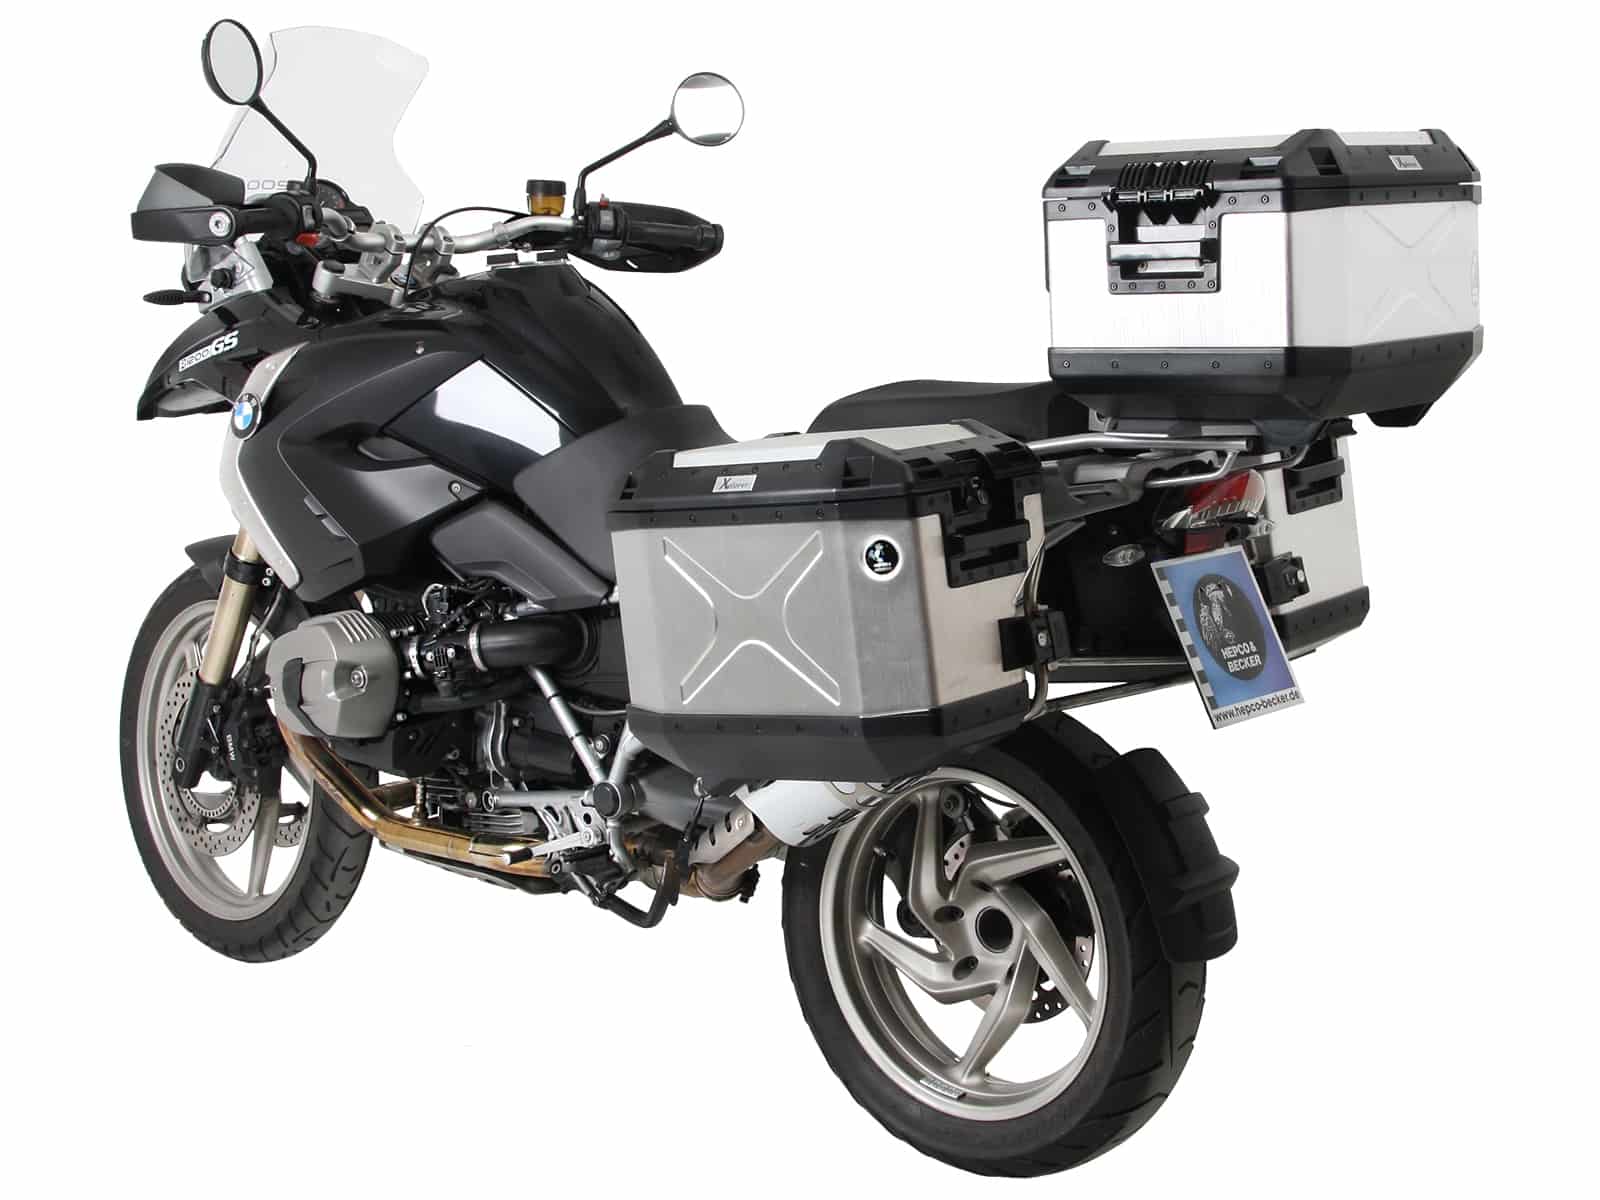 Sidecarrier Cutout stainless steel incl. Xplorer sideboxes silver for BMW R1200GS (2004-2012) / Adventure (2006-2013)